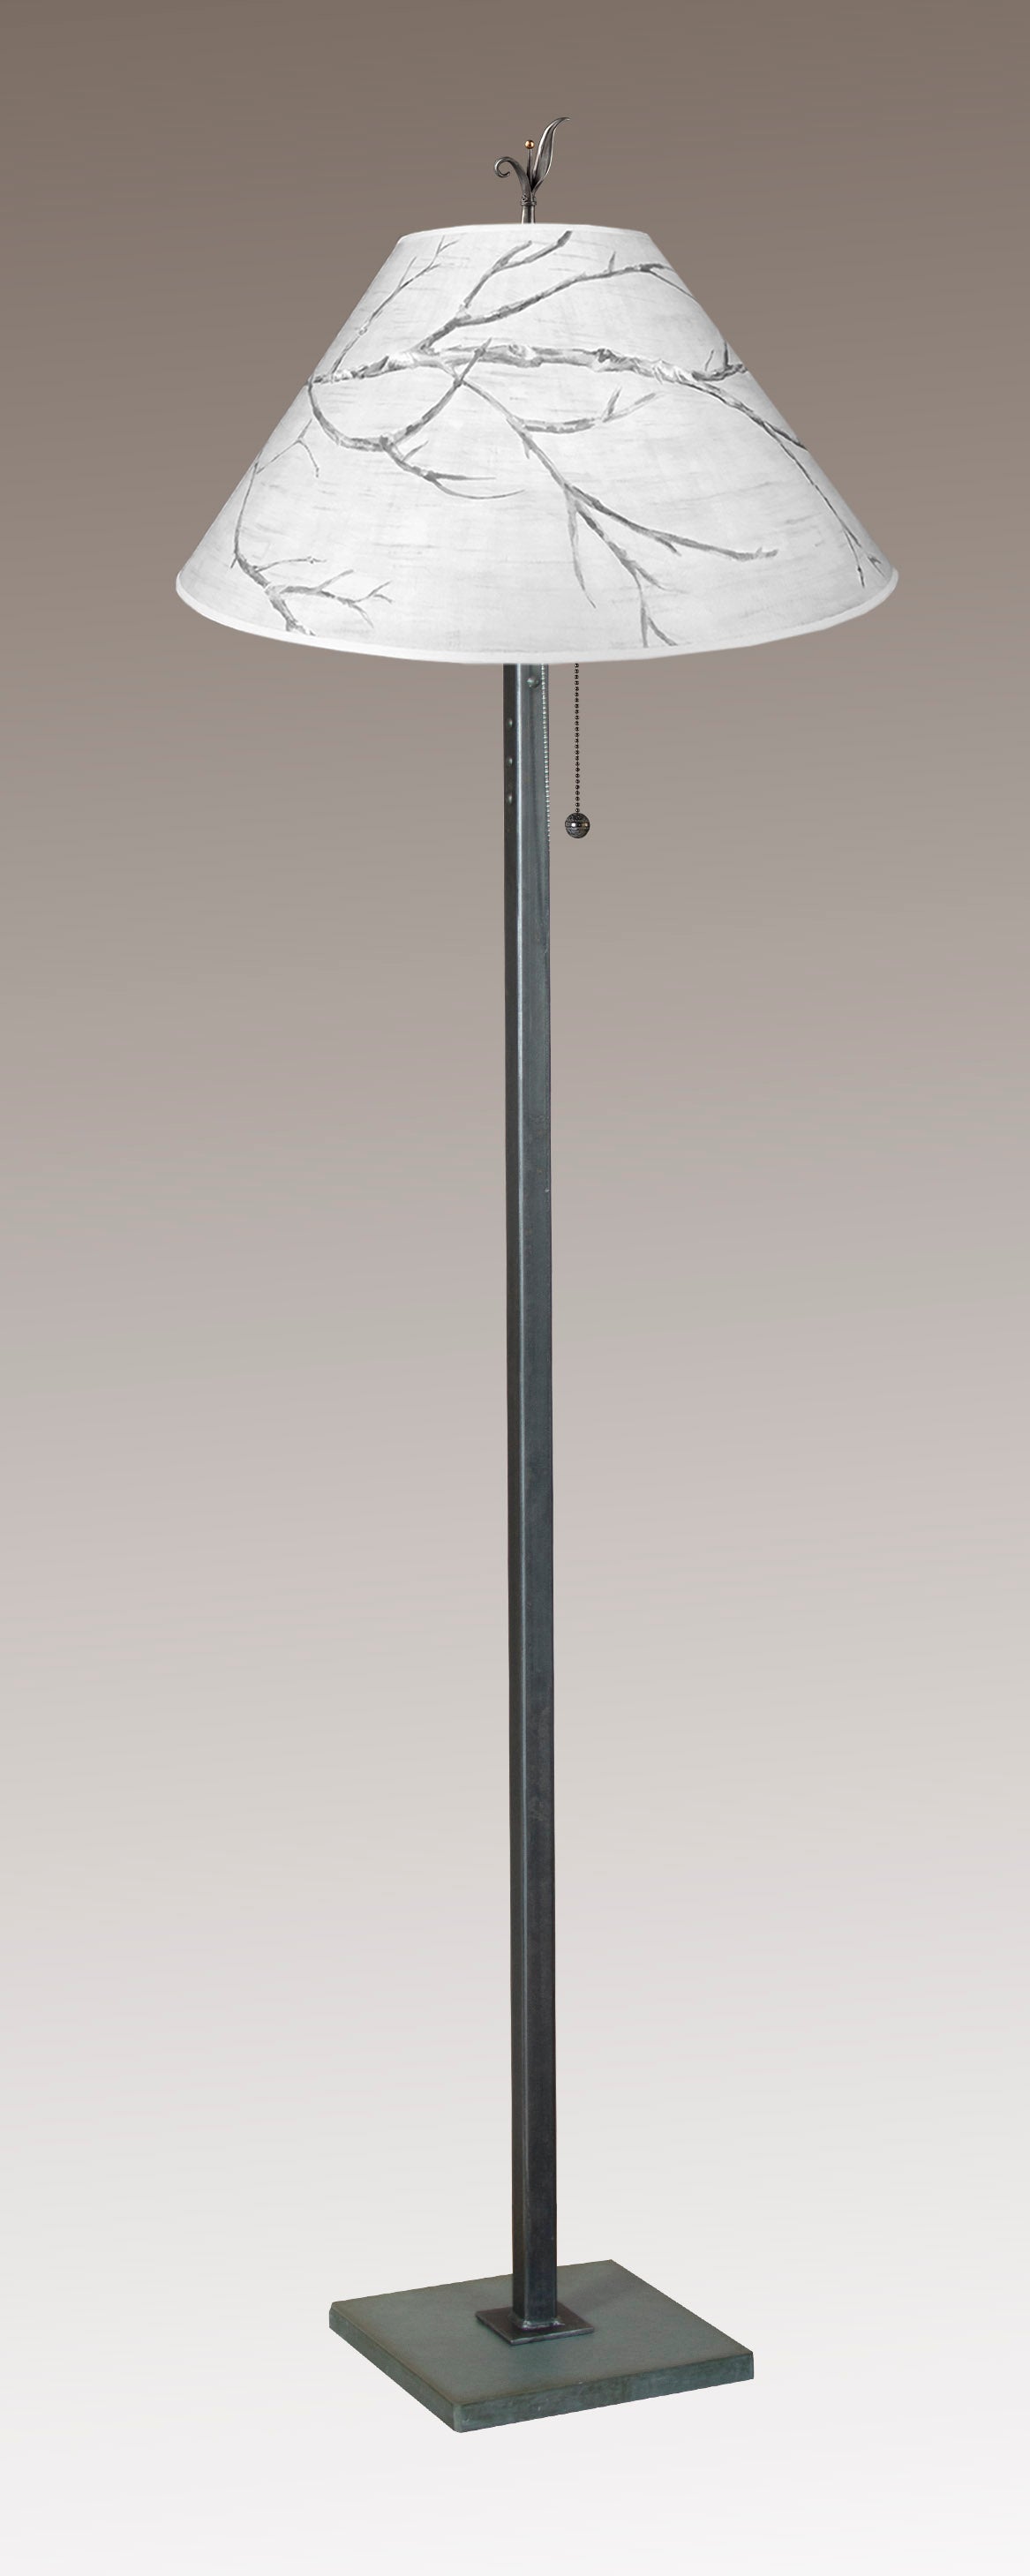 Steel Floor Lamp with Large Conical Shade in Sweeping Branch